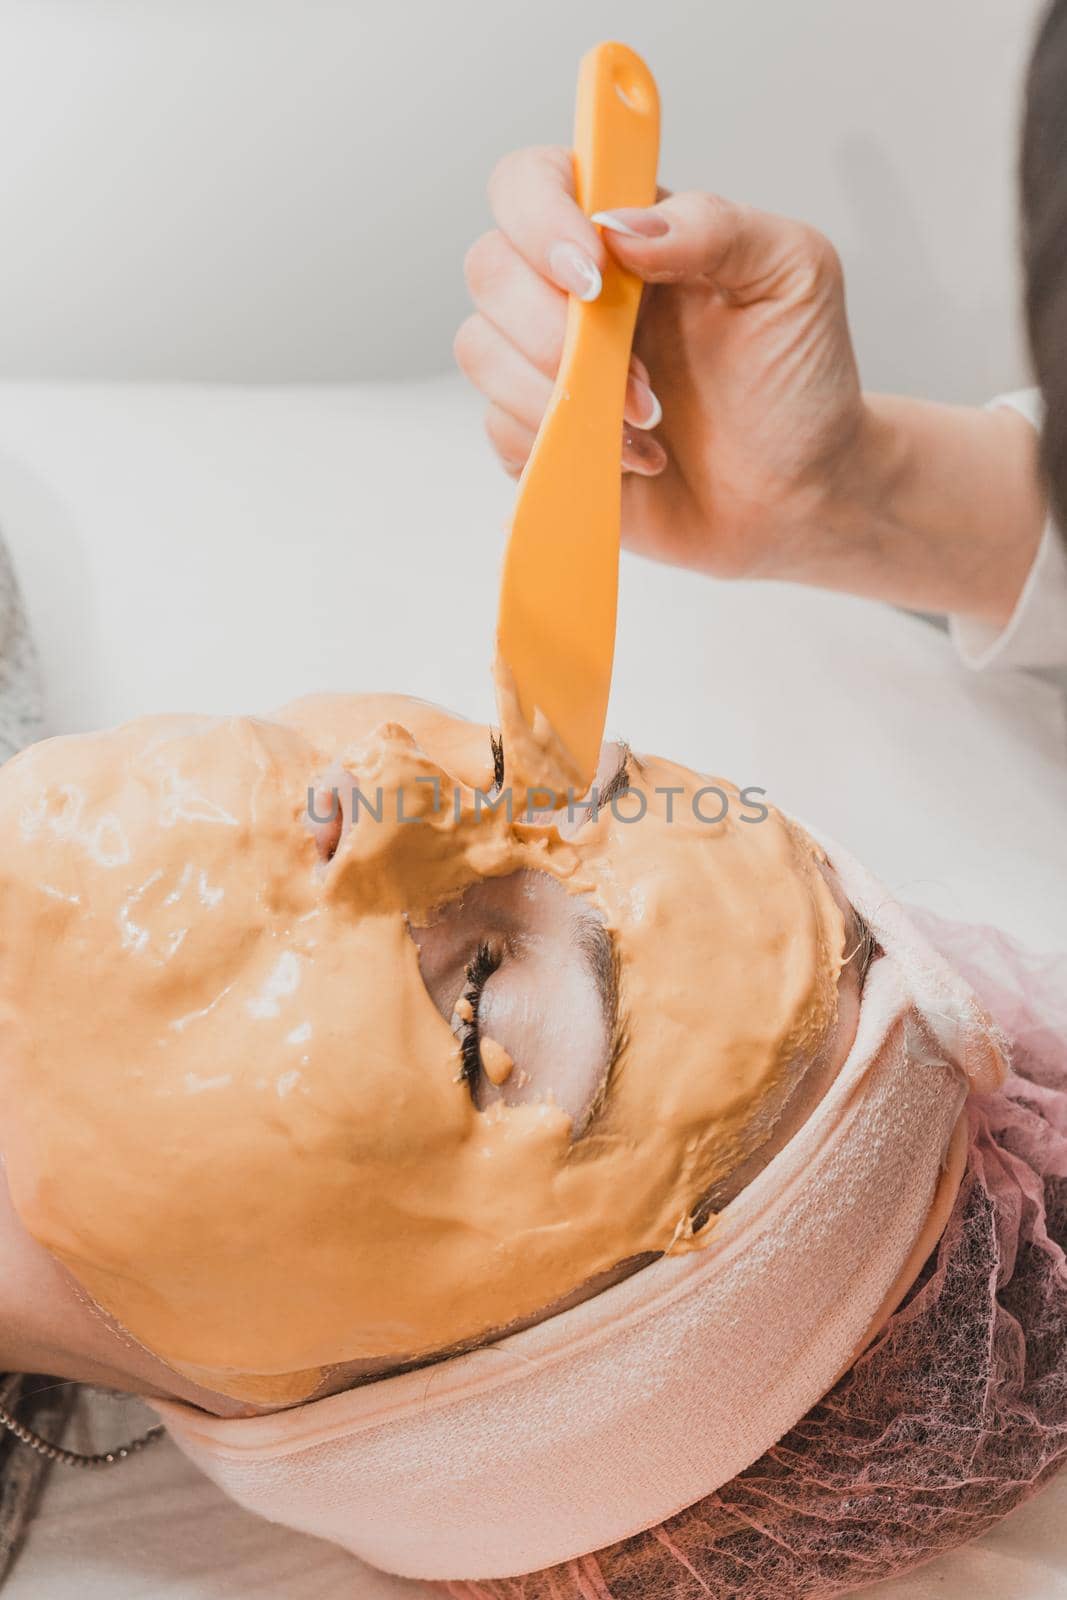 spa treatments in a beauty salon, hand of a professional beautician applying a gold mask on the client's face. new